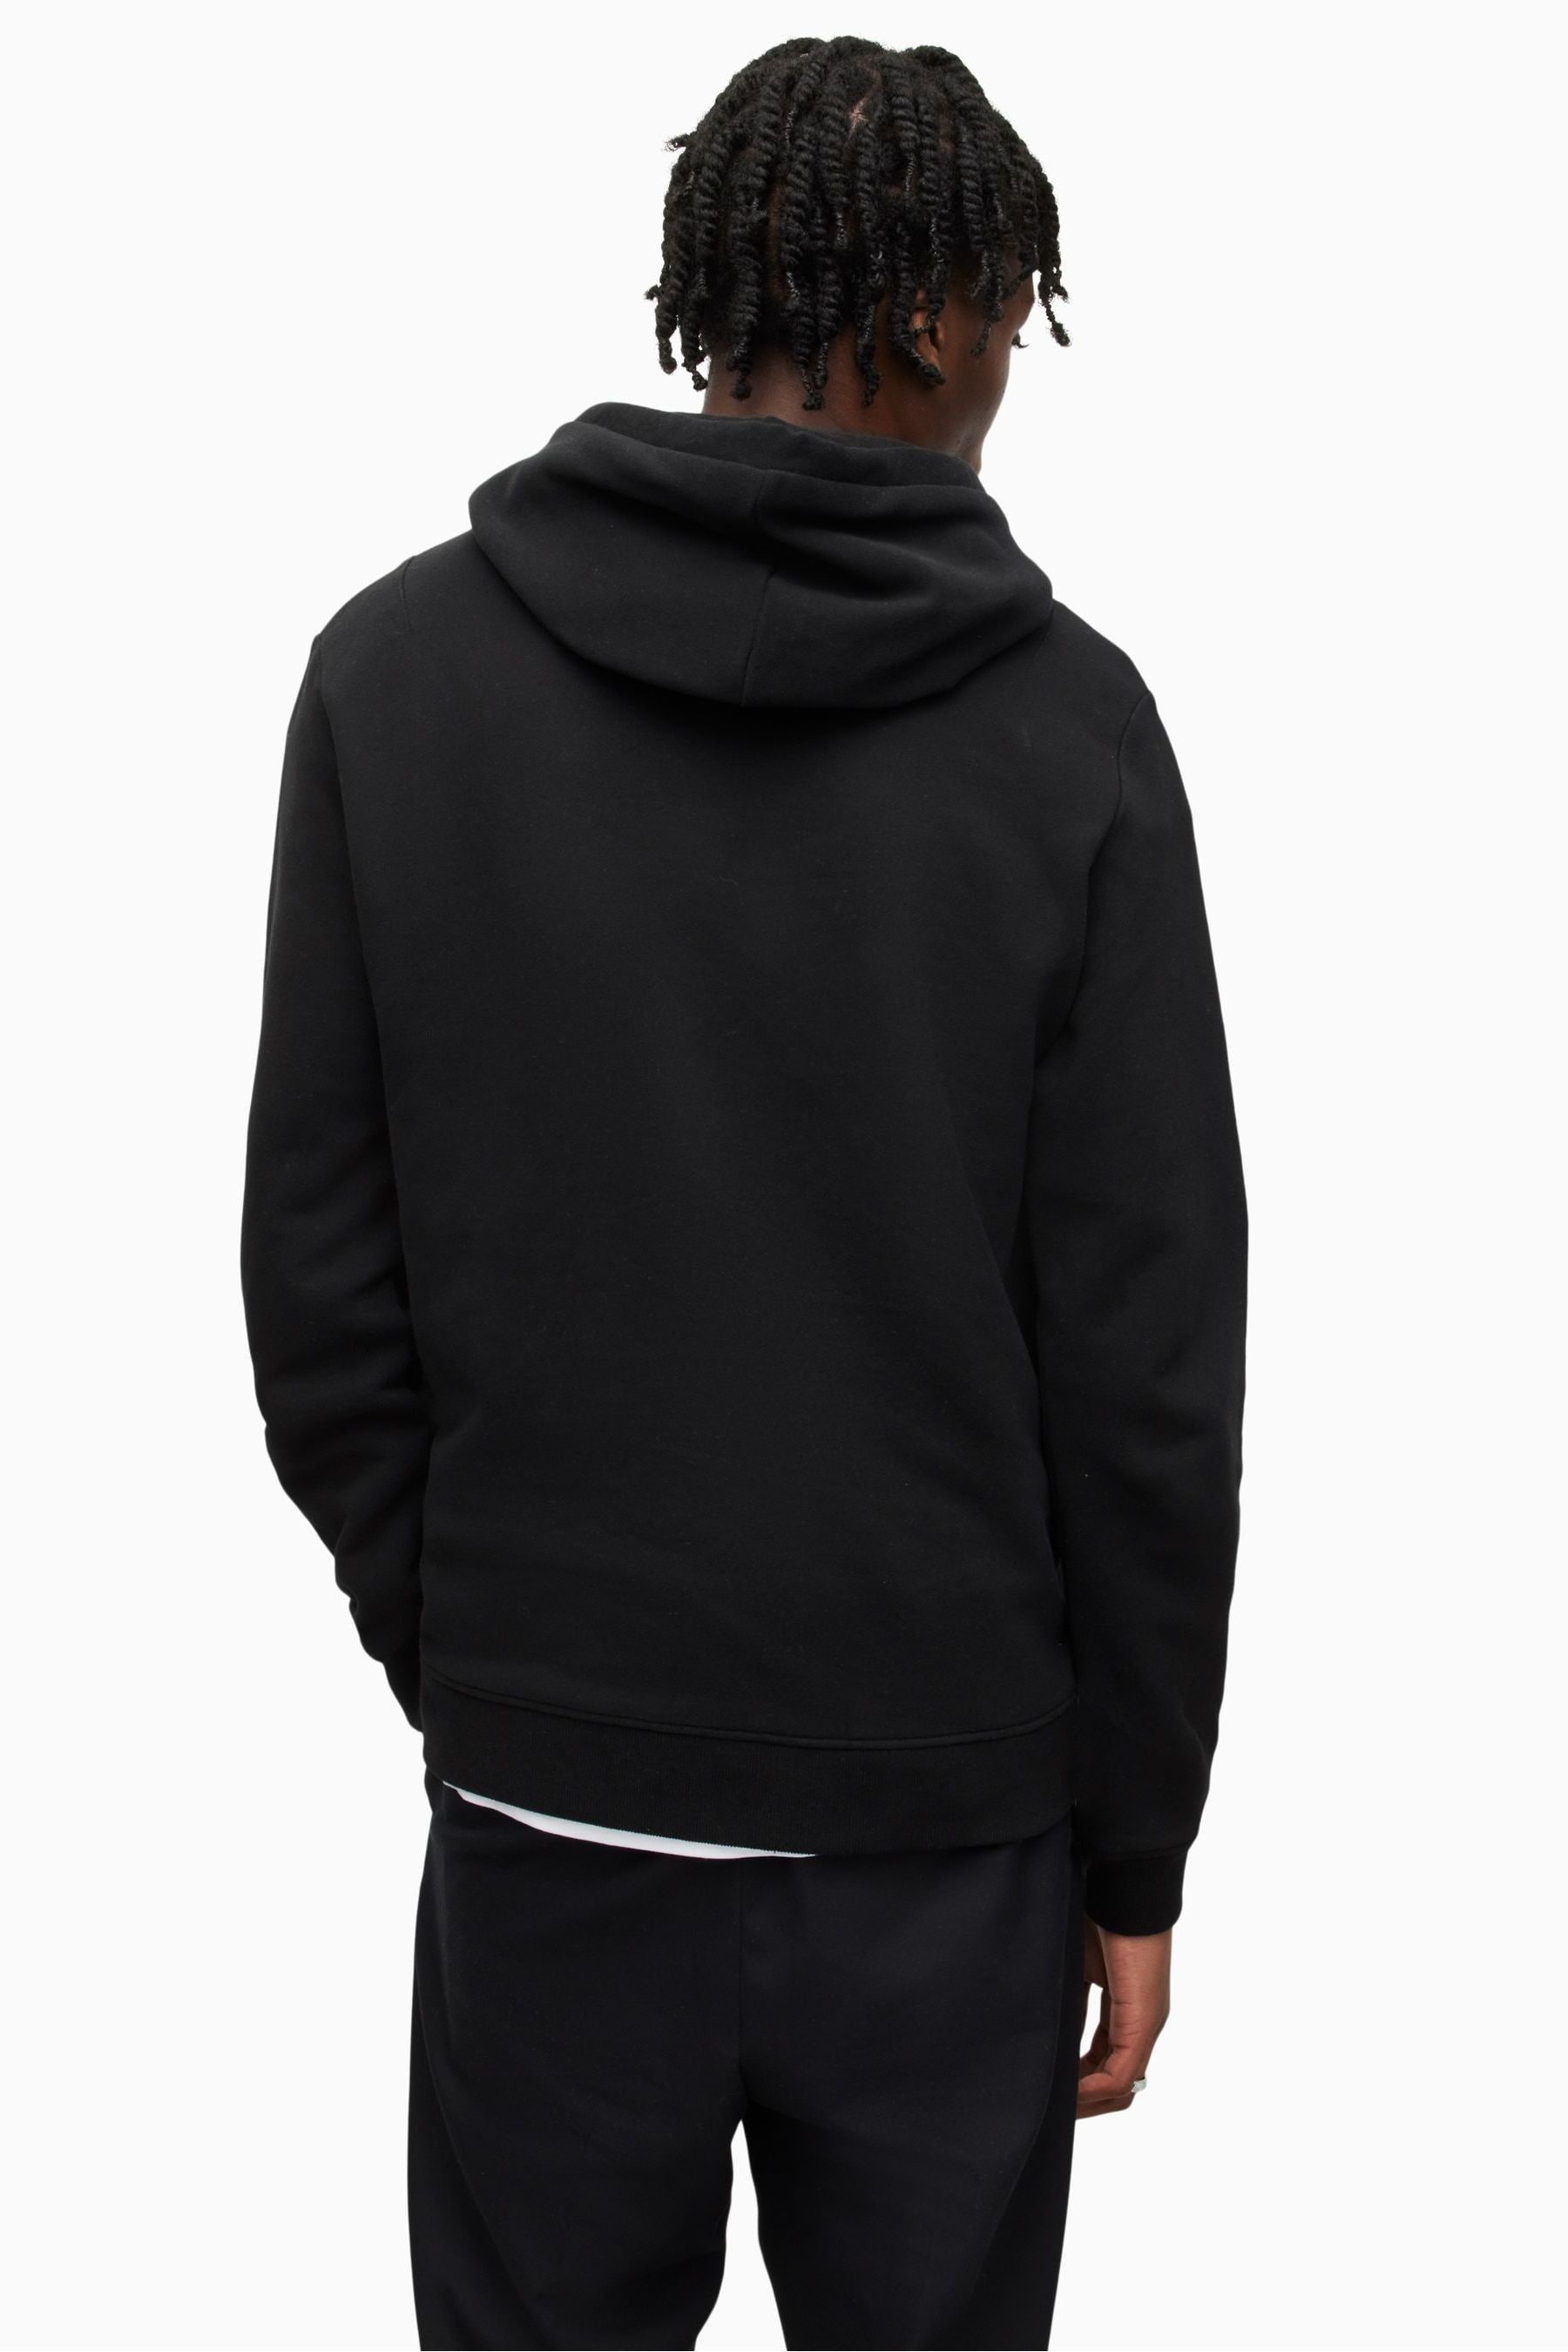 Buy AllSaints Raven Hoodie from the Next UK online shop